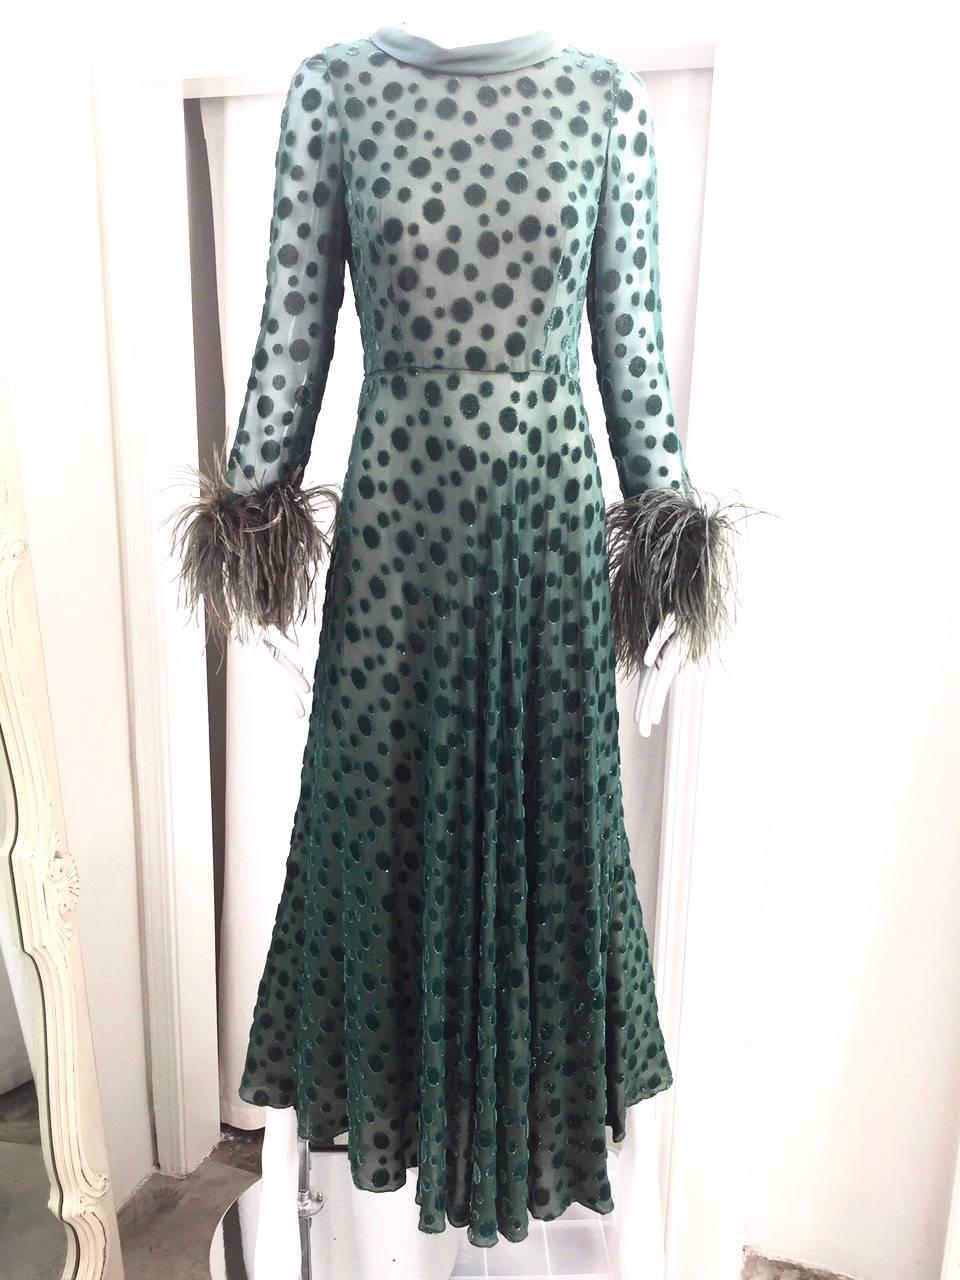 This 1970’s green Cardinali maxi dress is made of silk chiffon with irregular green velvet dots.  The mocha lining shows thru the silk chiffon to create a wonderful texture, and the ostrich feather cuffs add a glamorous touch. 
Size: